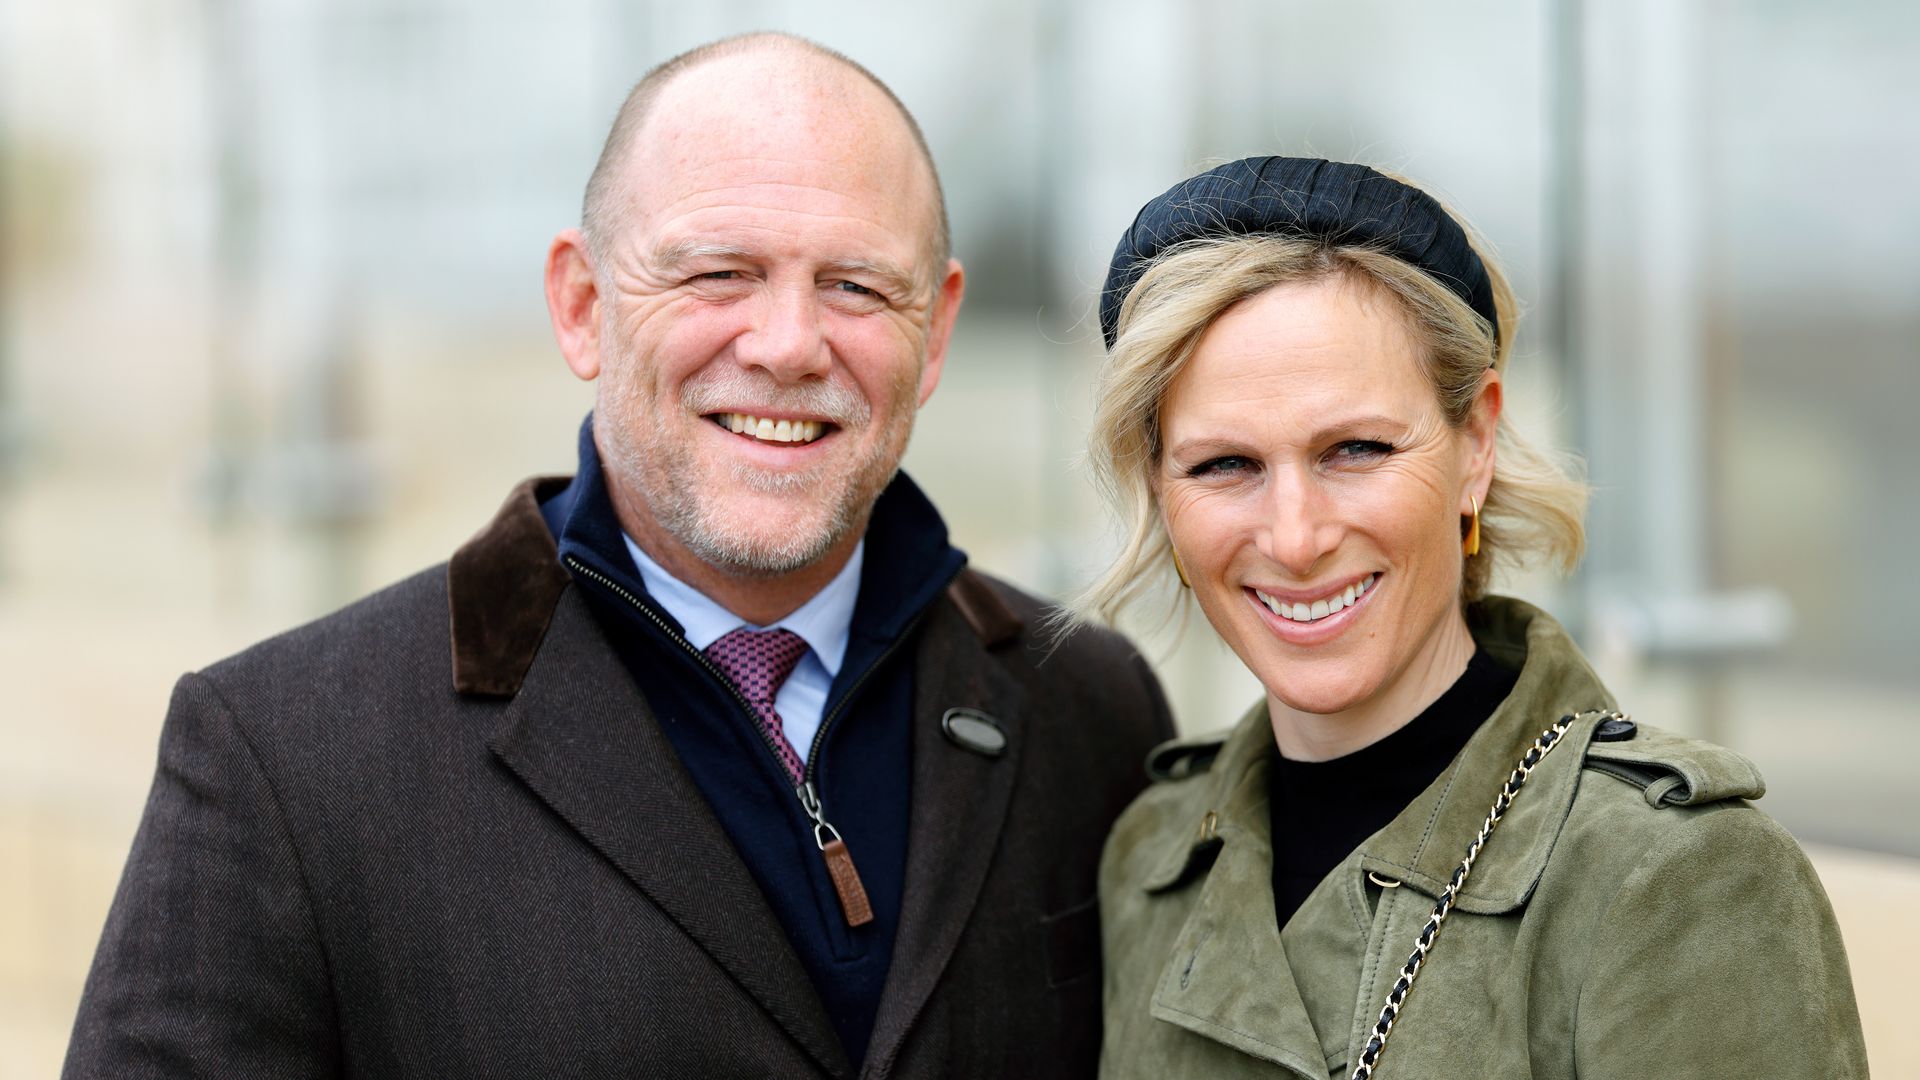 Mike Tindall shares insight into wife Zara's intimate birthday celebrations